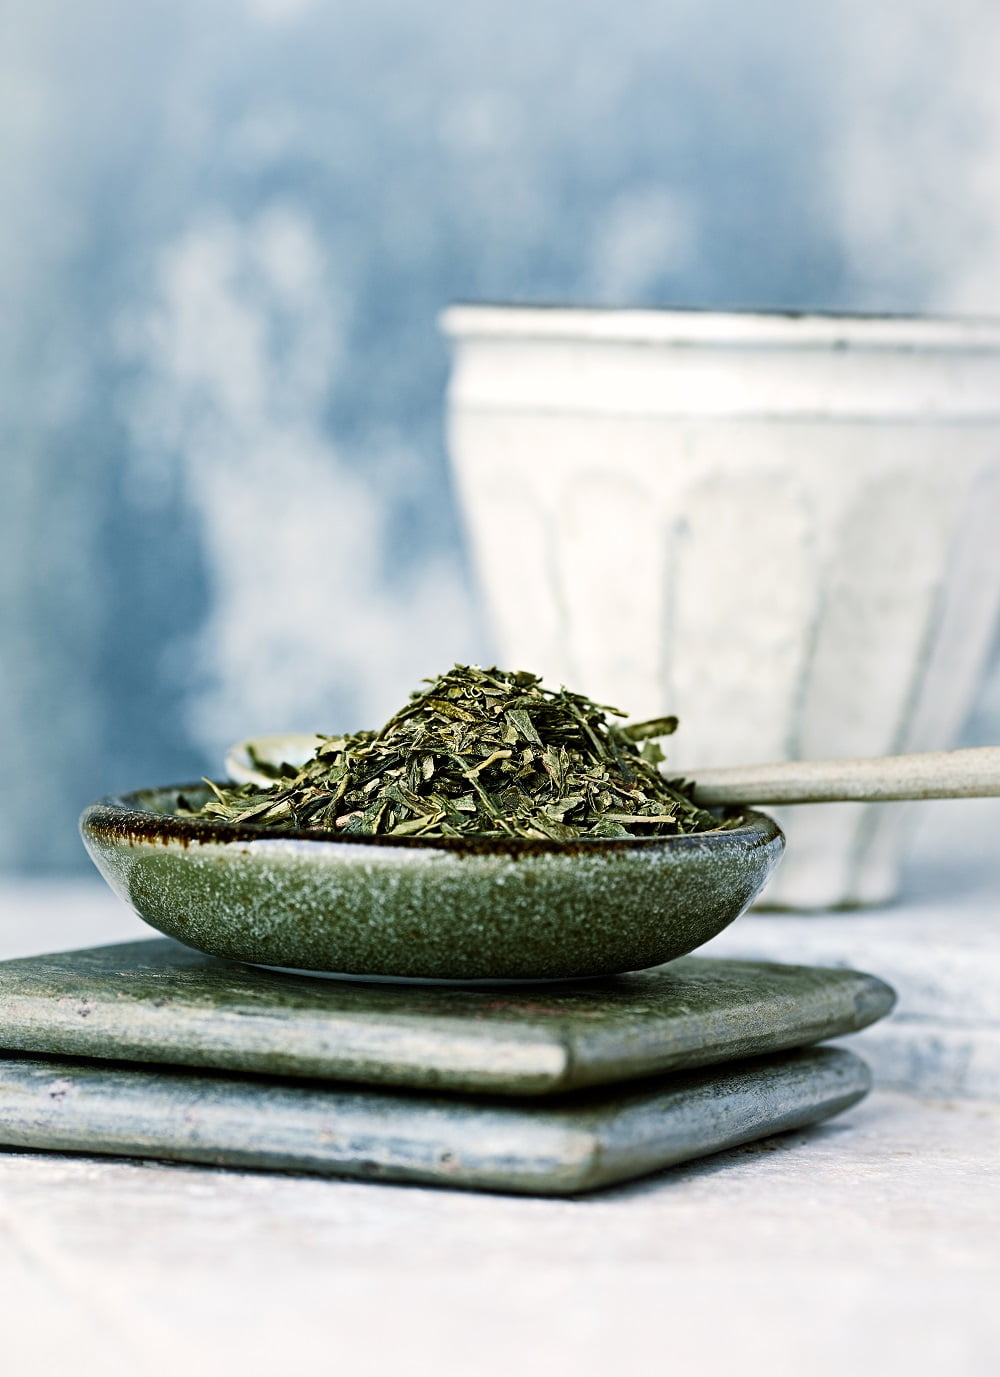 We know tea is a healthy hot drink, but what kind is the healthiest? Find out! 